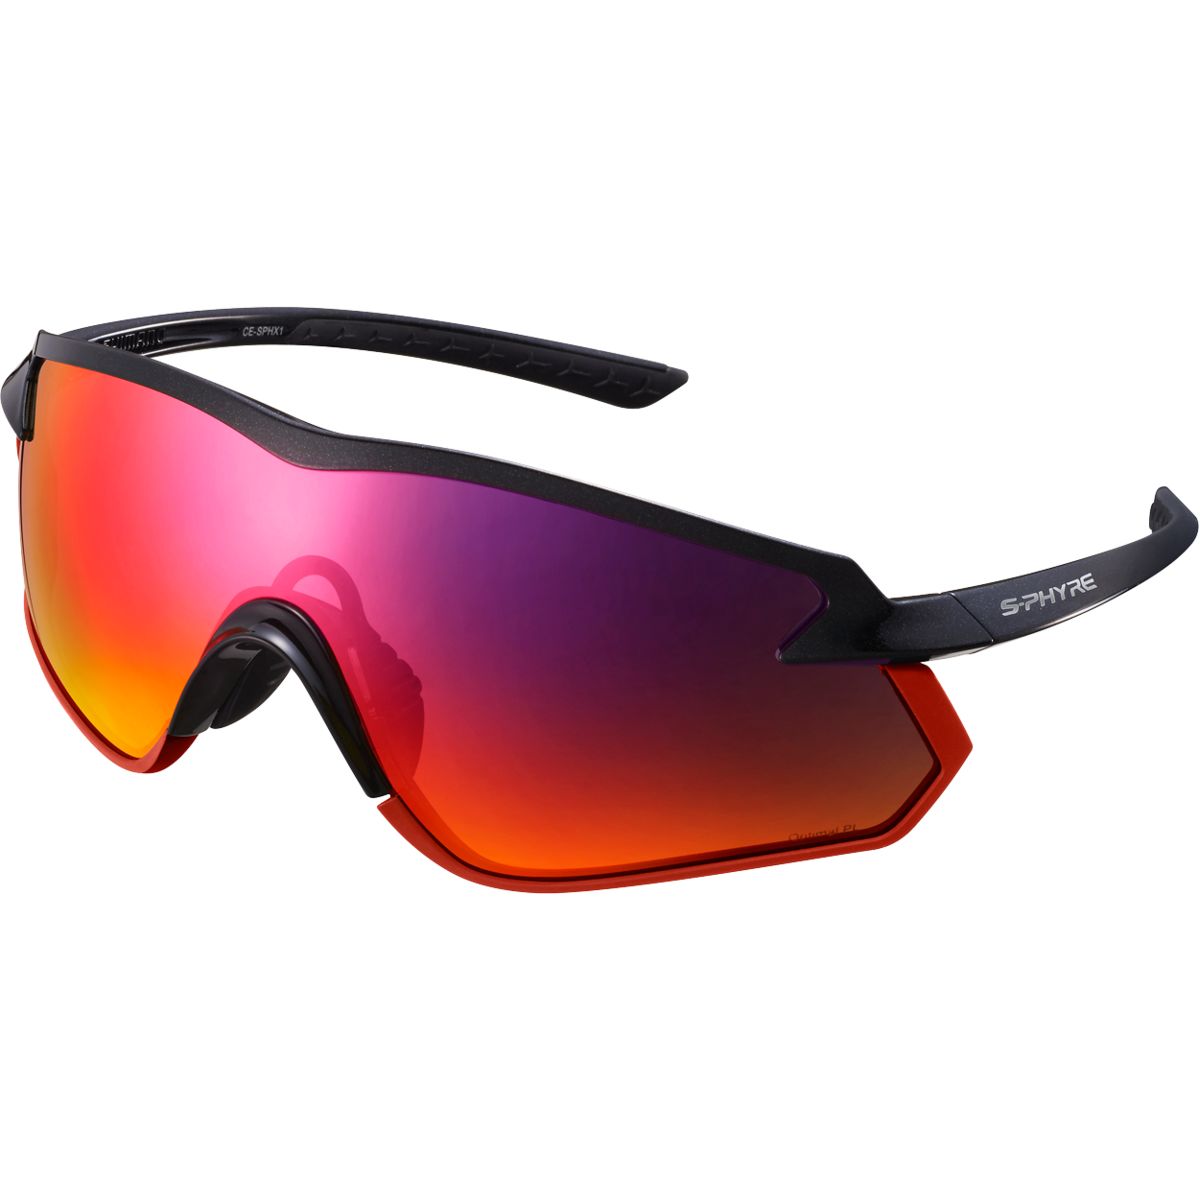 Shimano S-PHYRE X Cycling Sunglasses - CE-SPHX1 - Men's